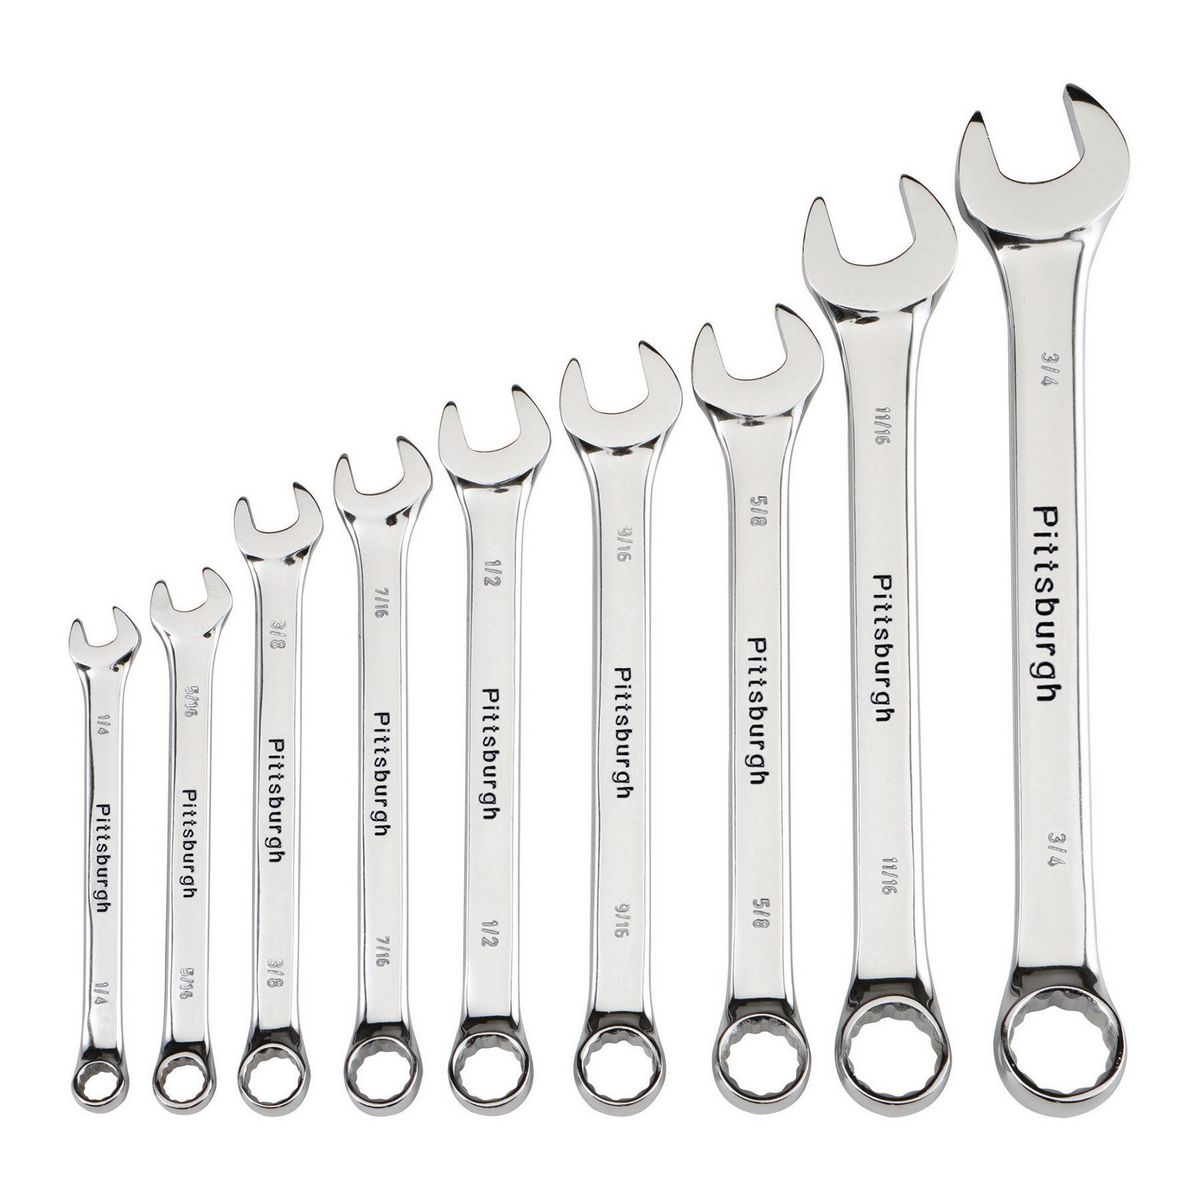 PITTSBURGH Fully Polished SAE Combination Wrench Set 9 Pc. - Item 42304 / 63282 / 69043